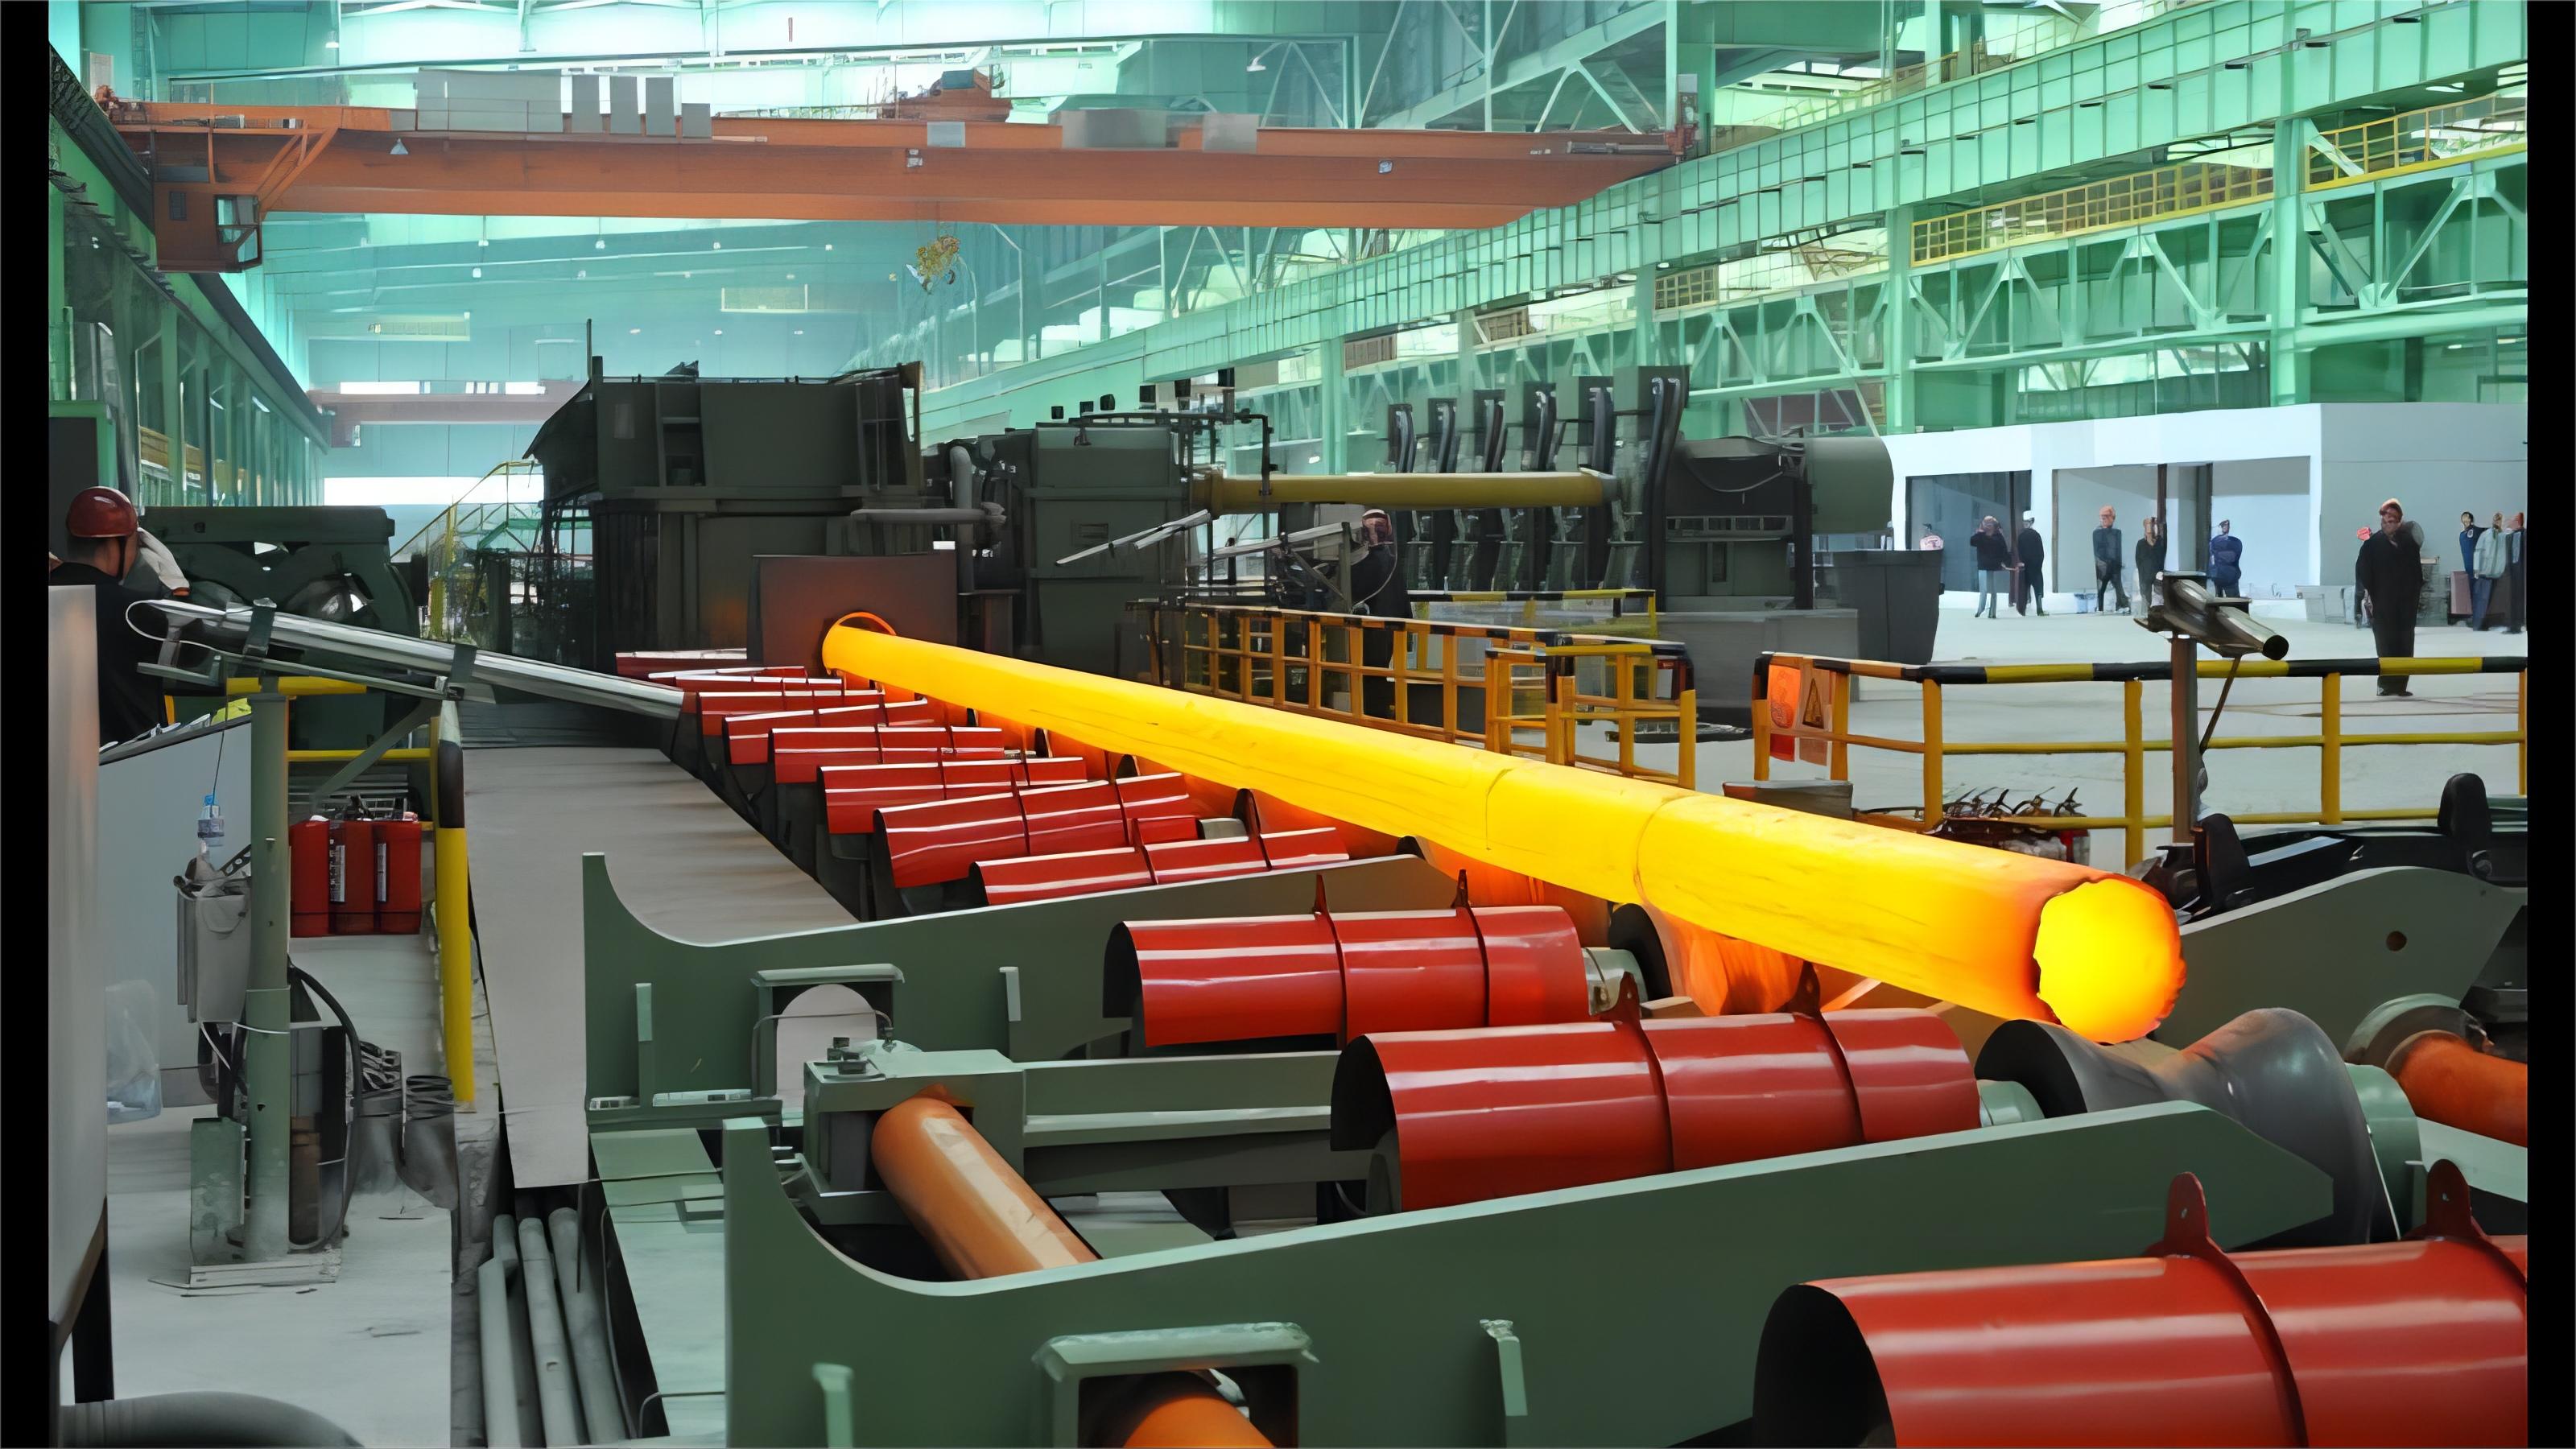 ASTM A106 Seamless Carbon Steel tubes for High-Temperature Fluid Transport: Production and Applications by Womic Steel